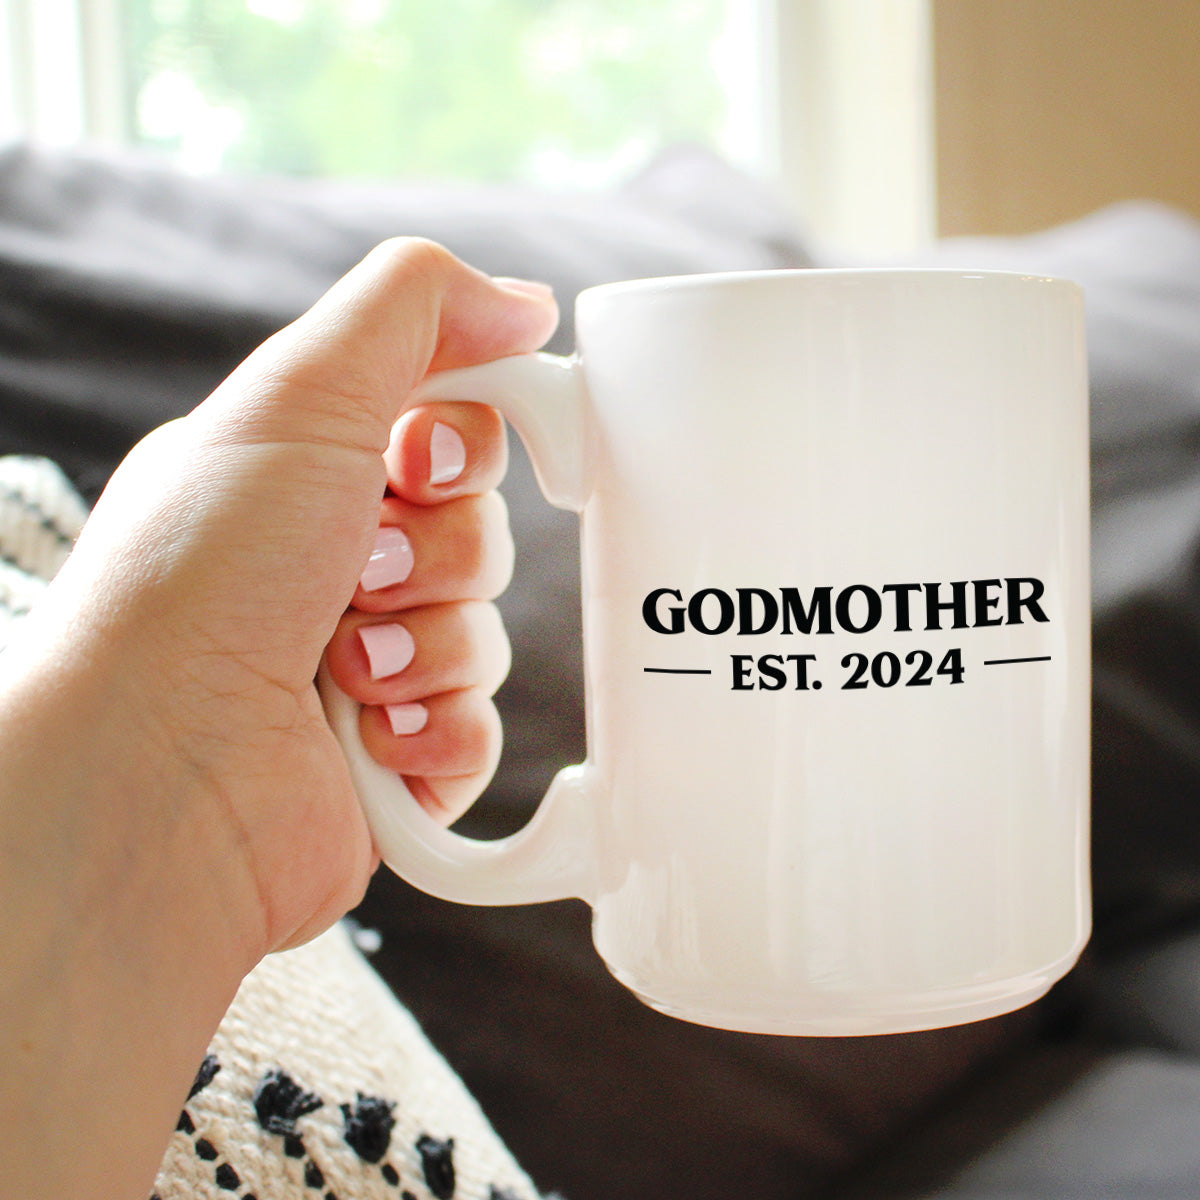 Godmother Est 2024 - New Godmother Coffee Mug Proposal Gift for First Time Godparents - Bold